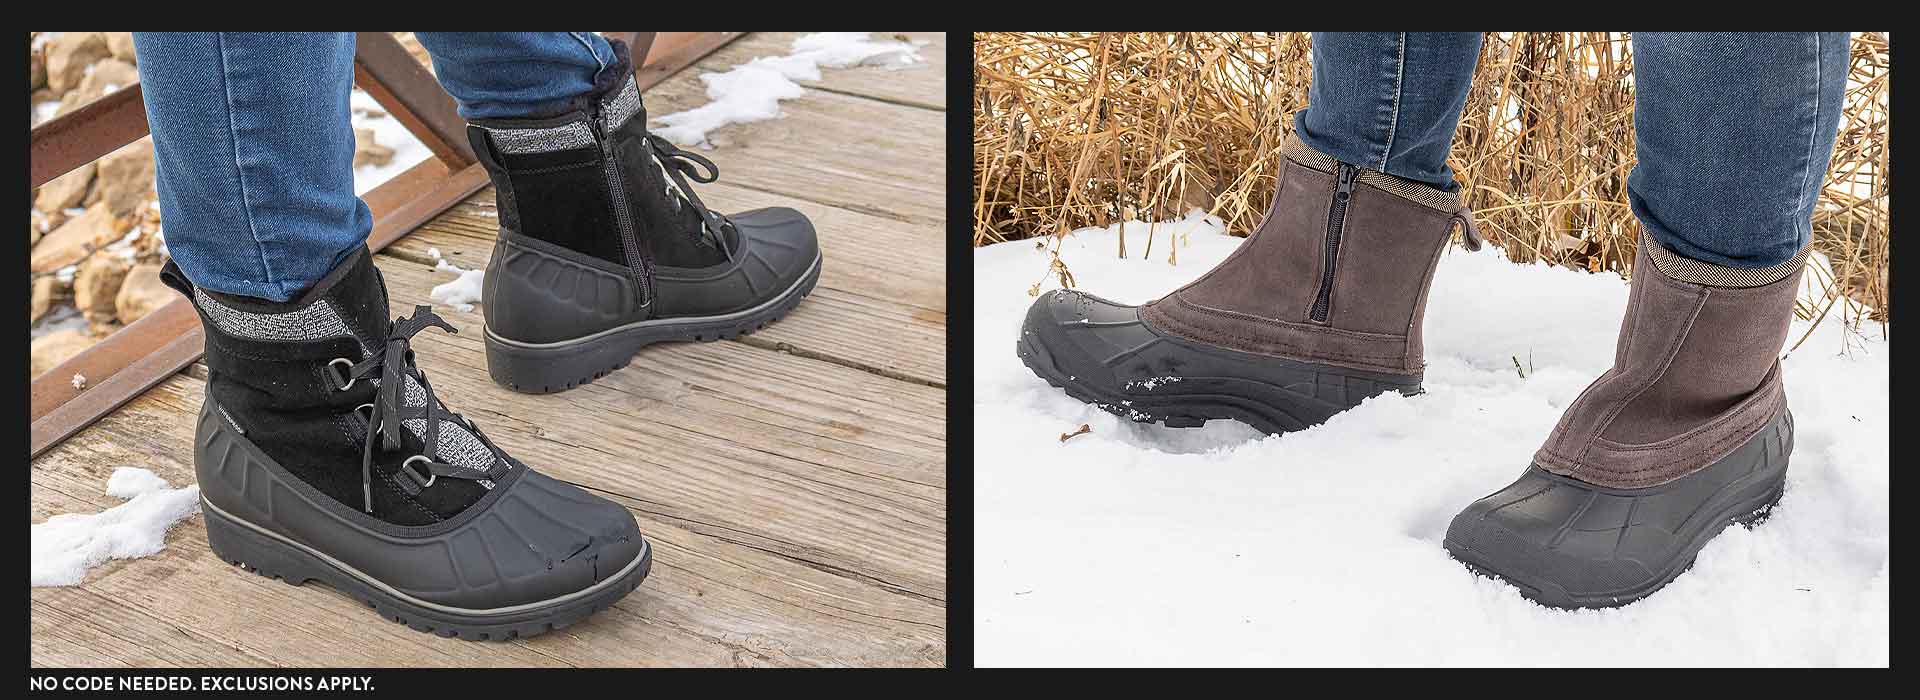 An Extra 10% OFF Winter Boots & Women's Dress and Casual Boots! Final Day!